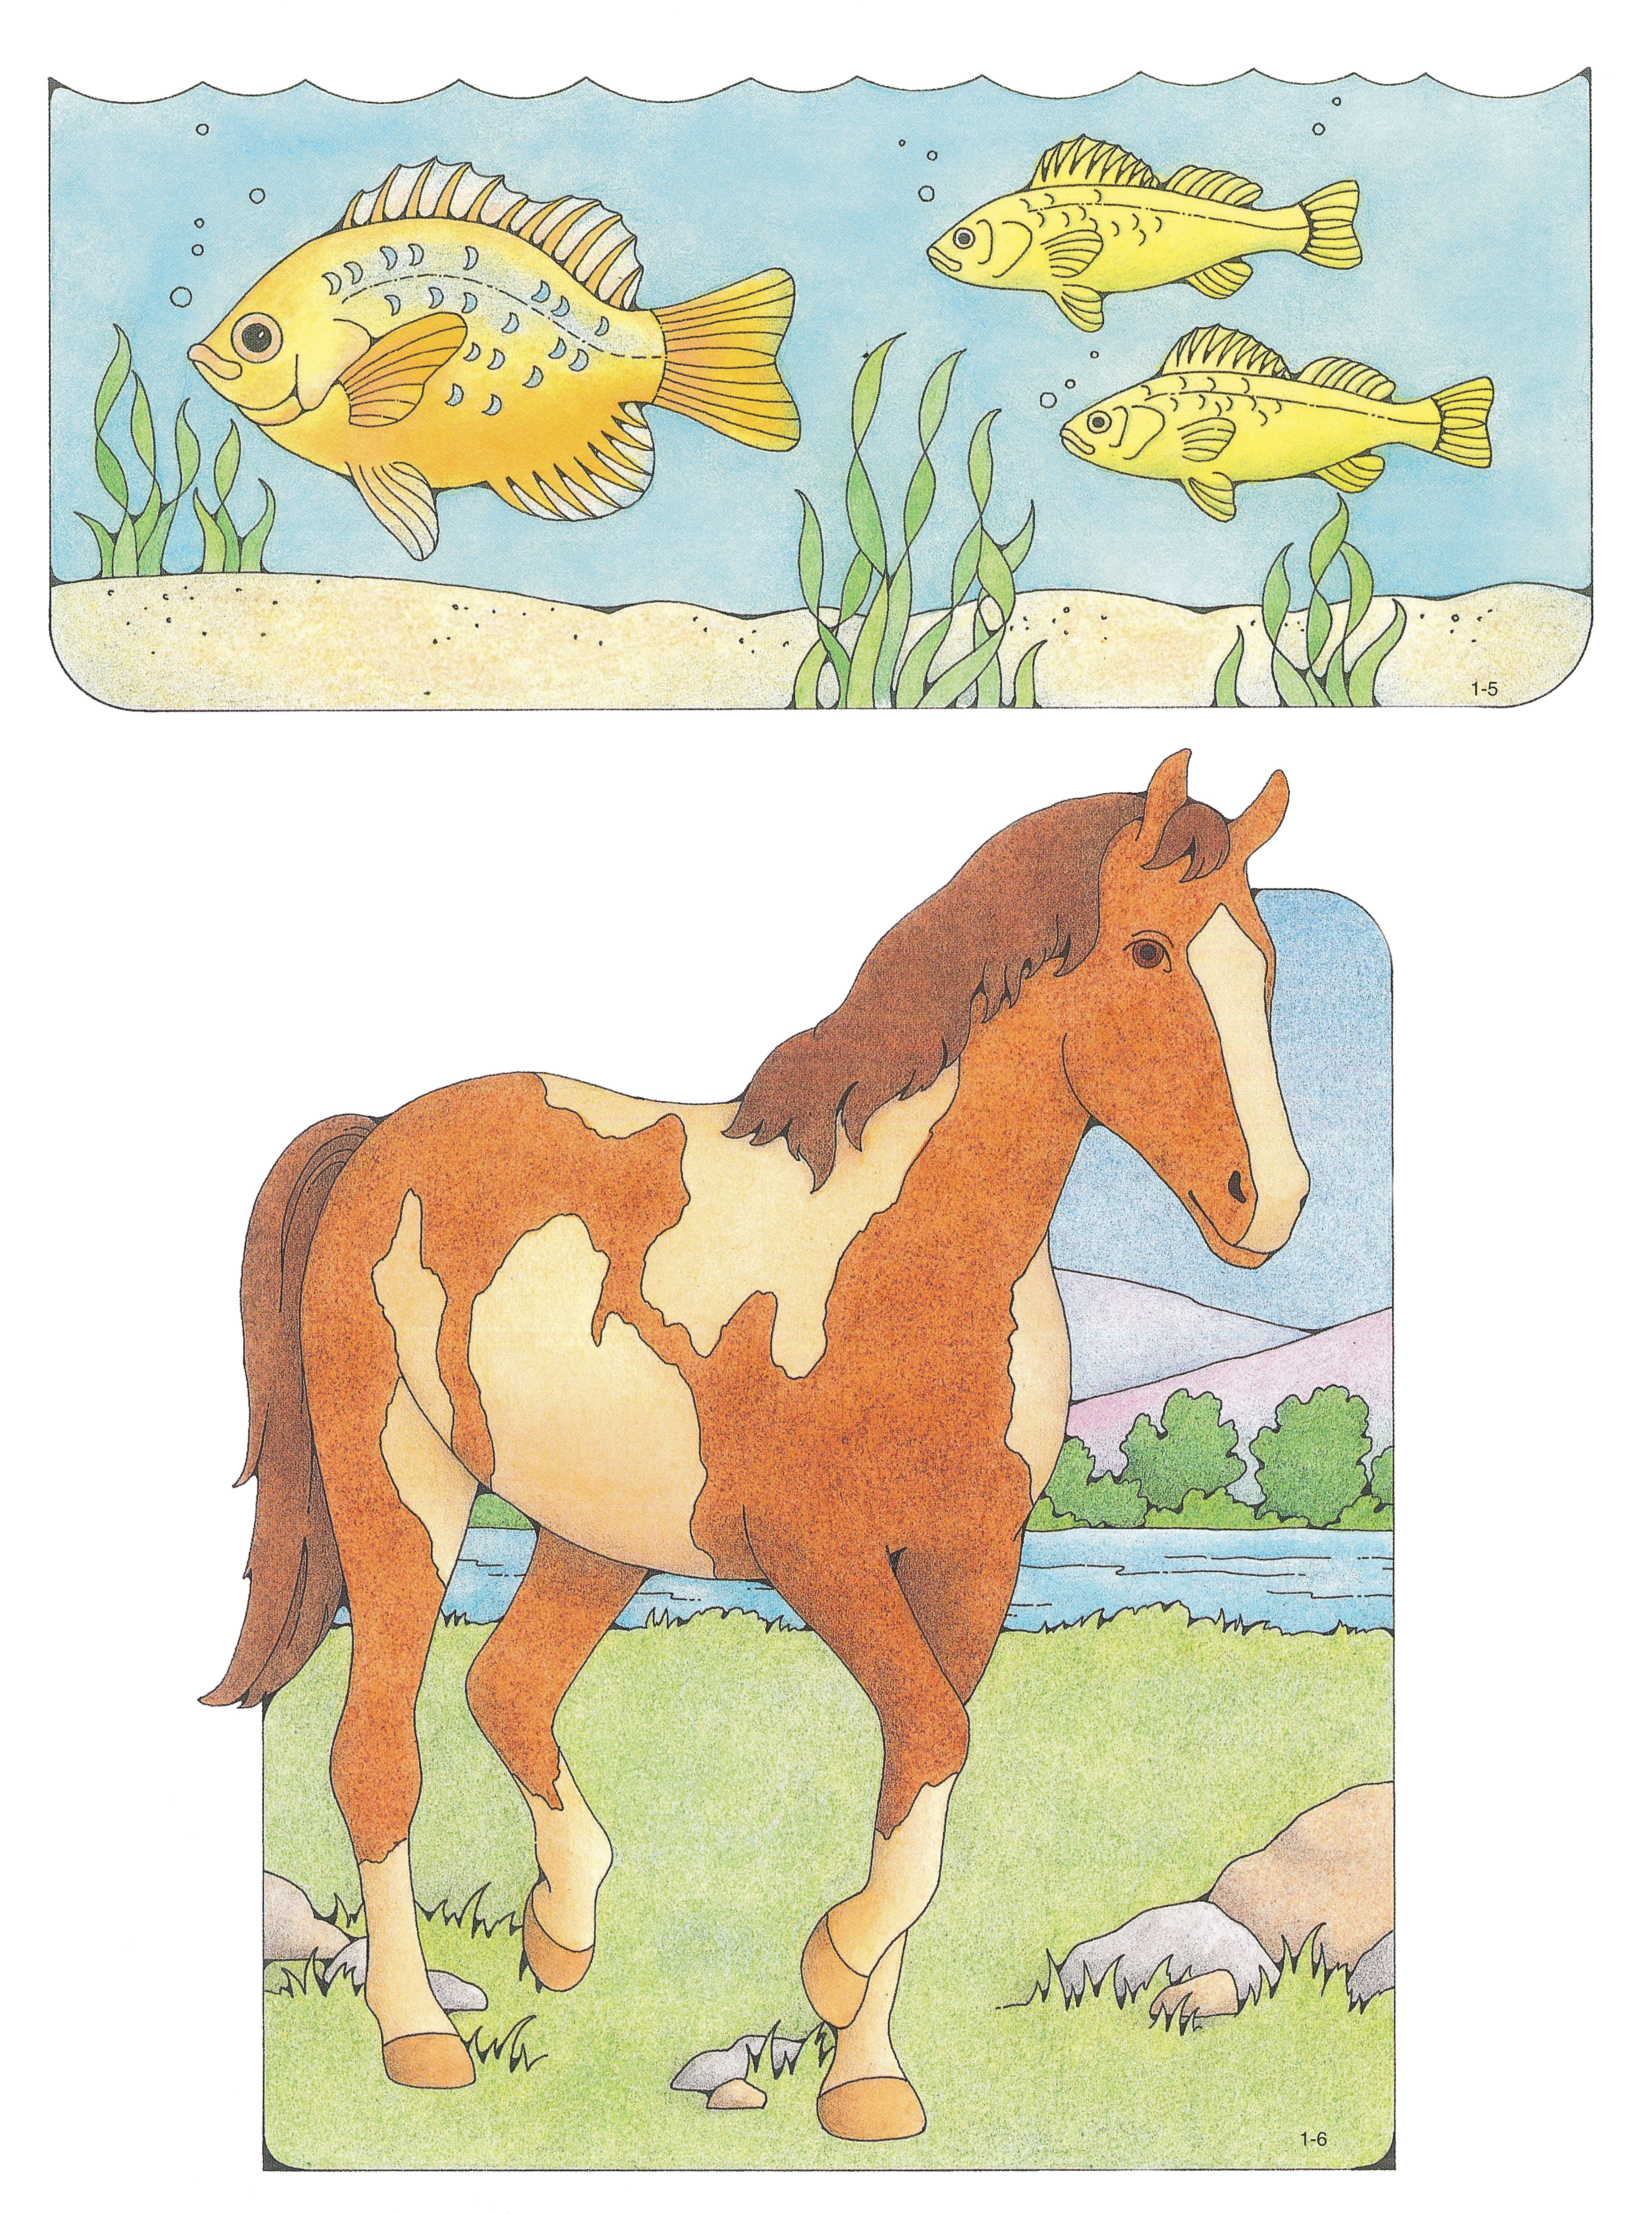 Primary cutouts of three yellow fish swimming in water and a brown horse with cream-colored spots walking on grass near rocks and a river.